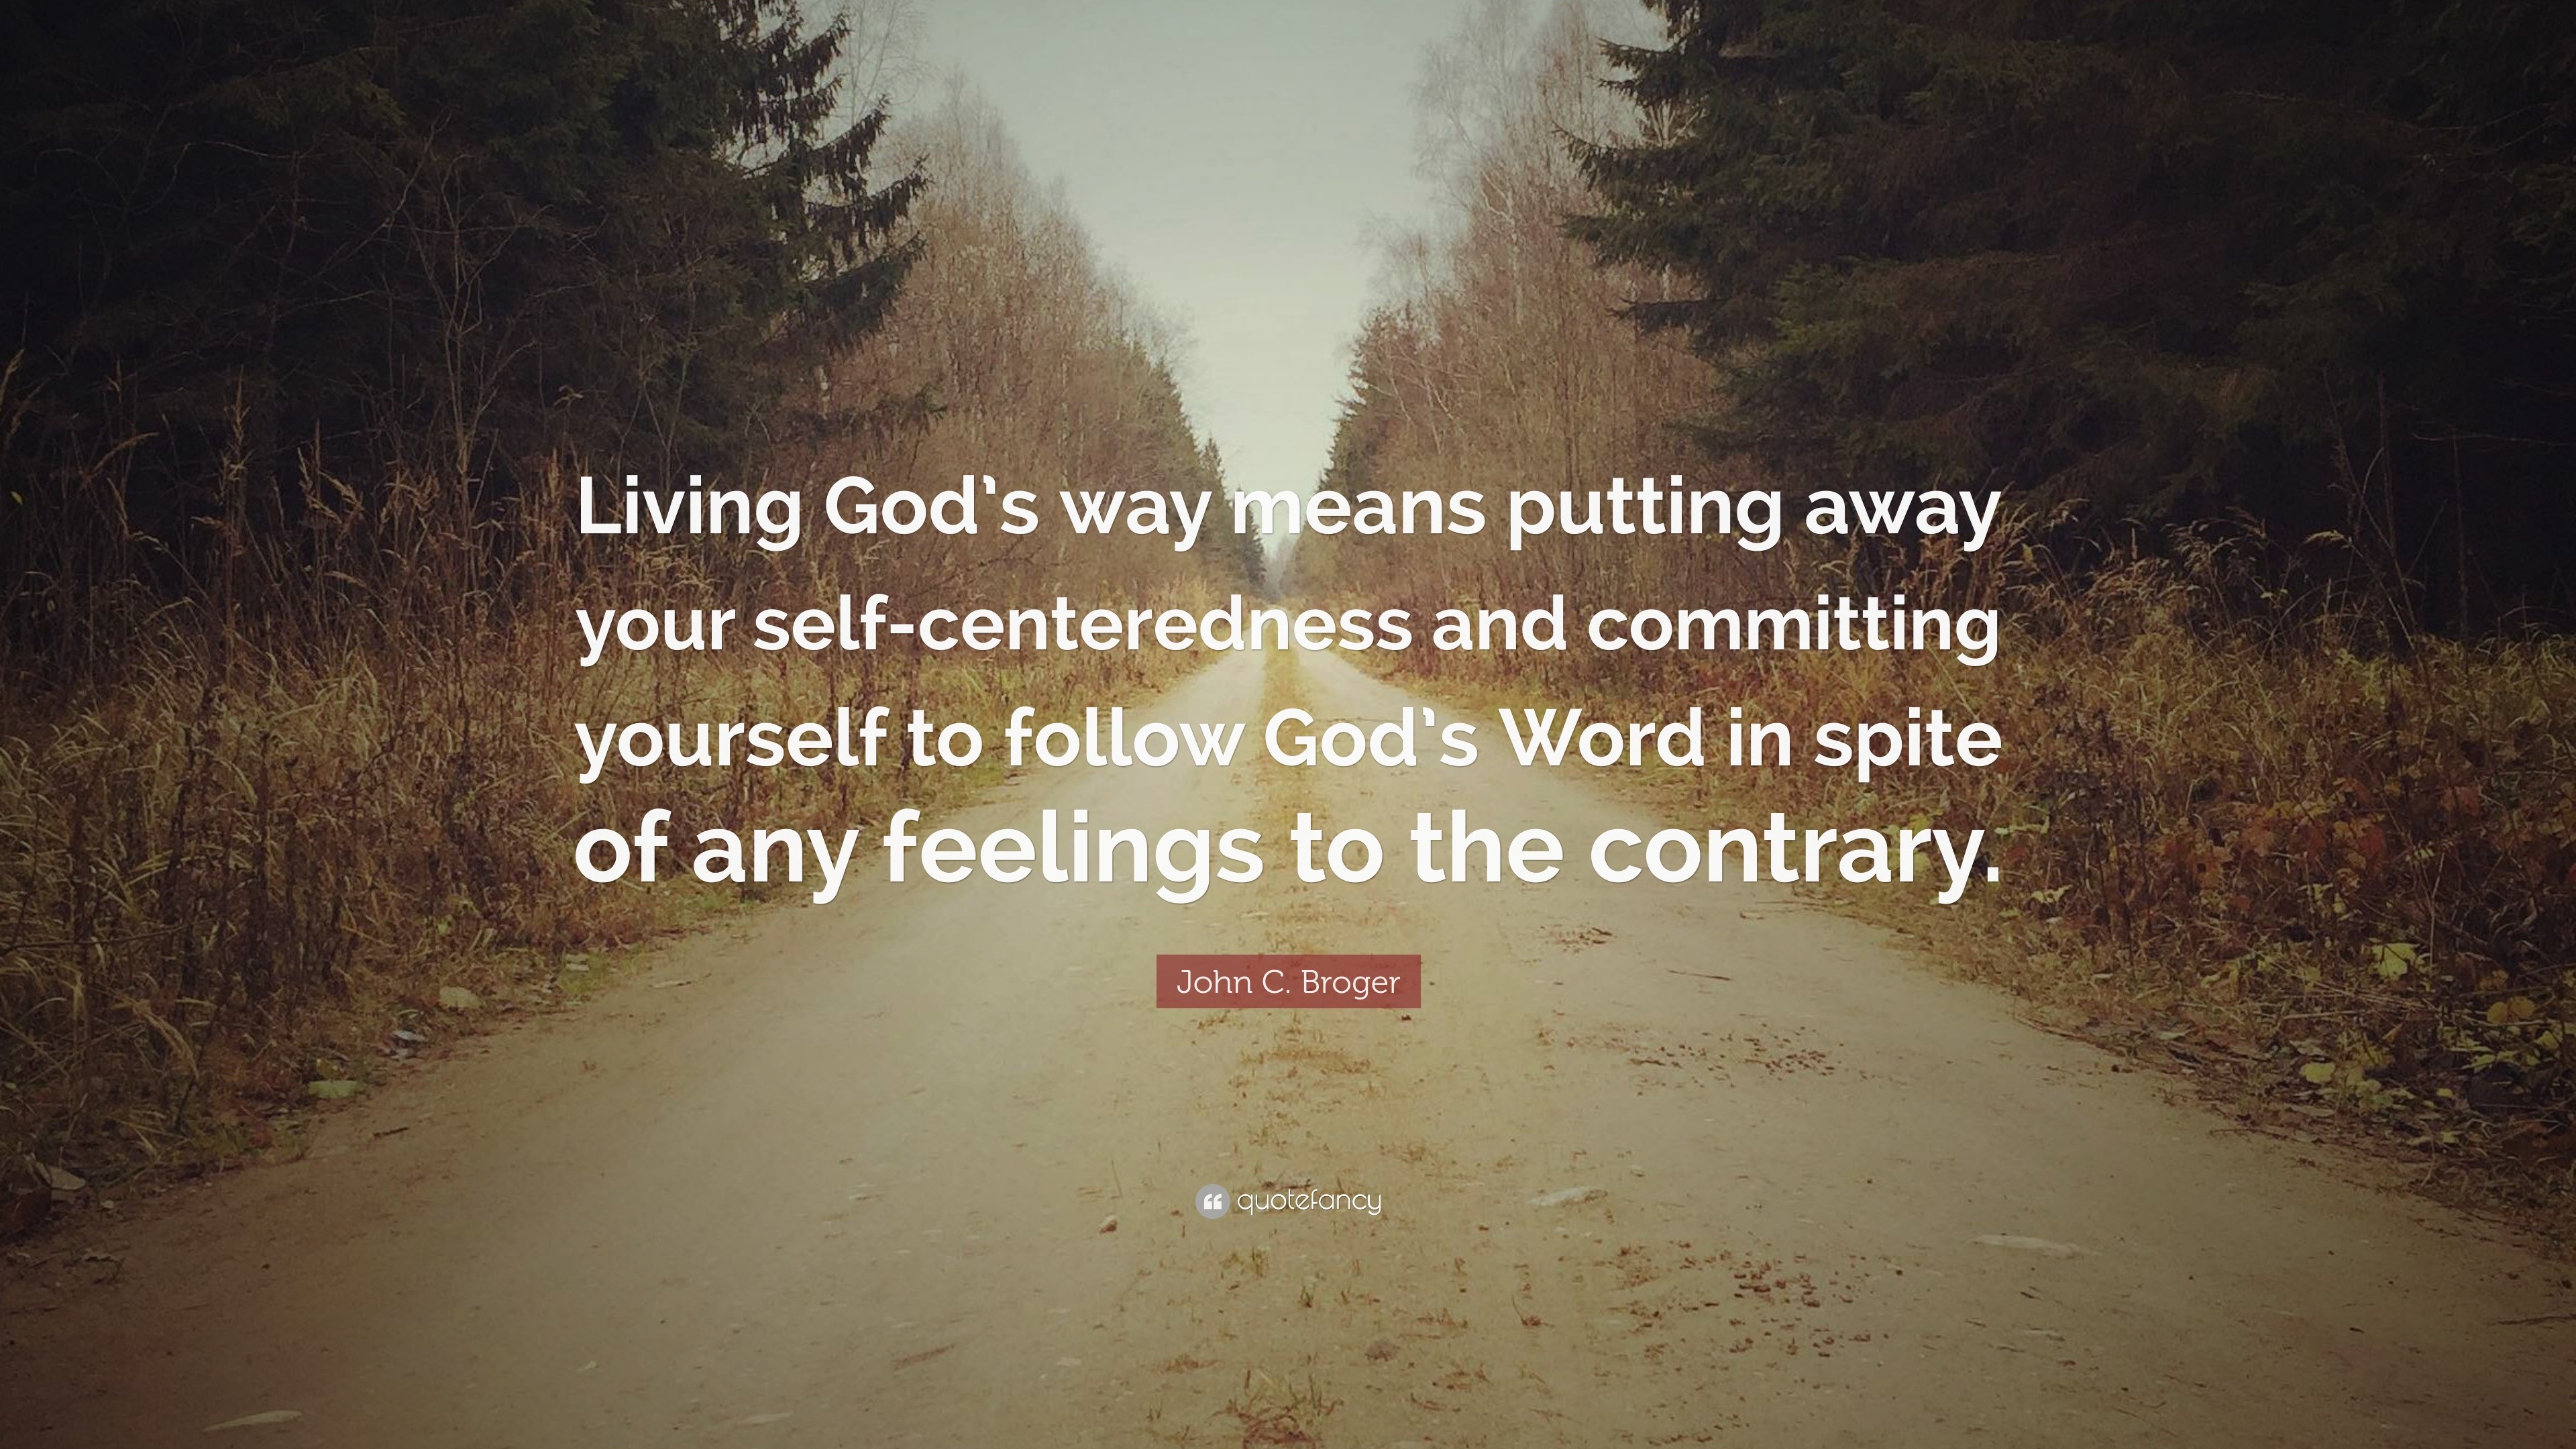 1505009-John-C-Broger-Quote-Living-God-s-way-means-putting-away-your-self.jpg